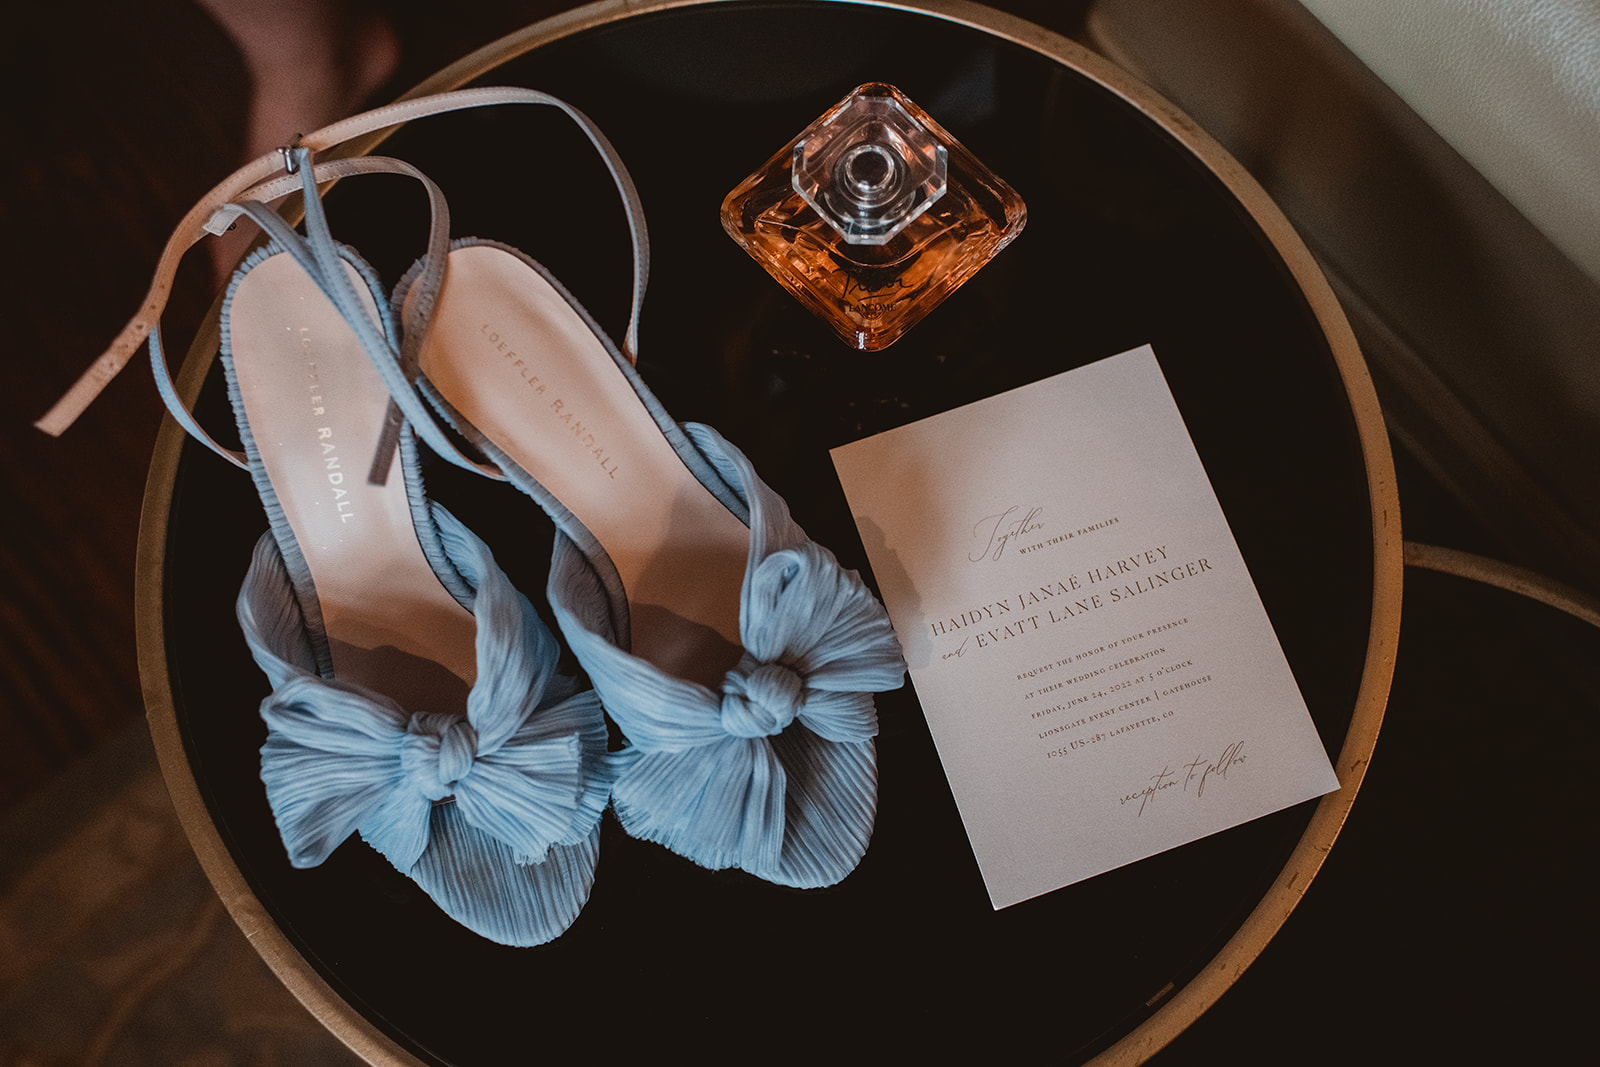 Blue heels sit next to wedding invite and perfume 